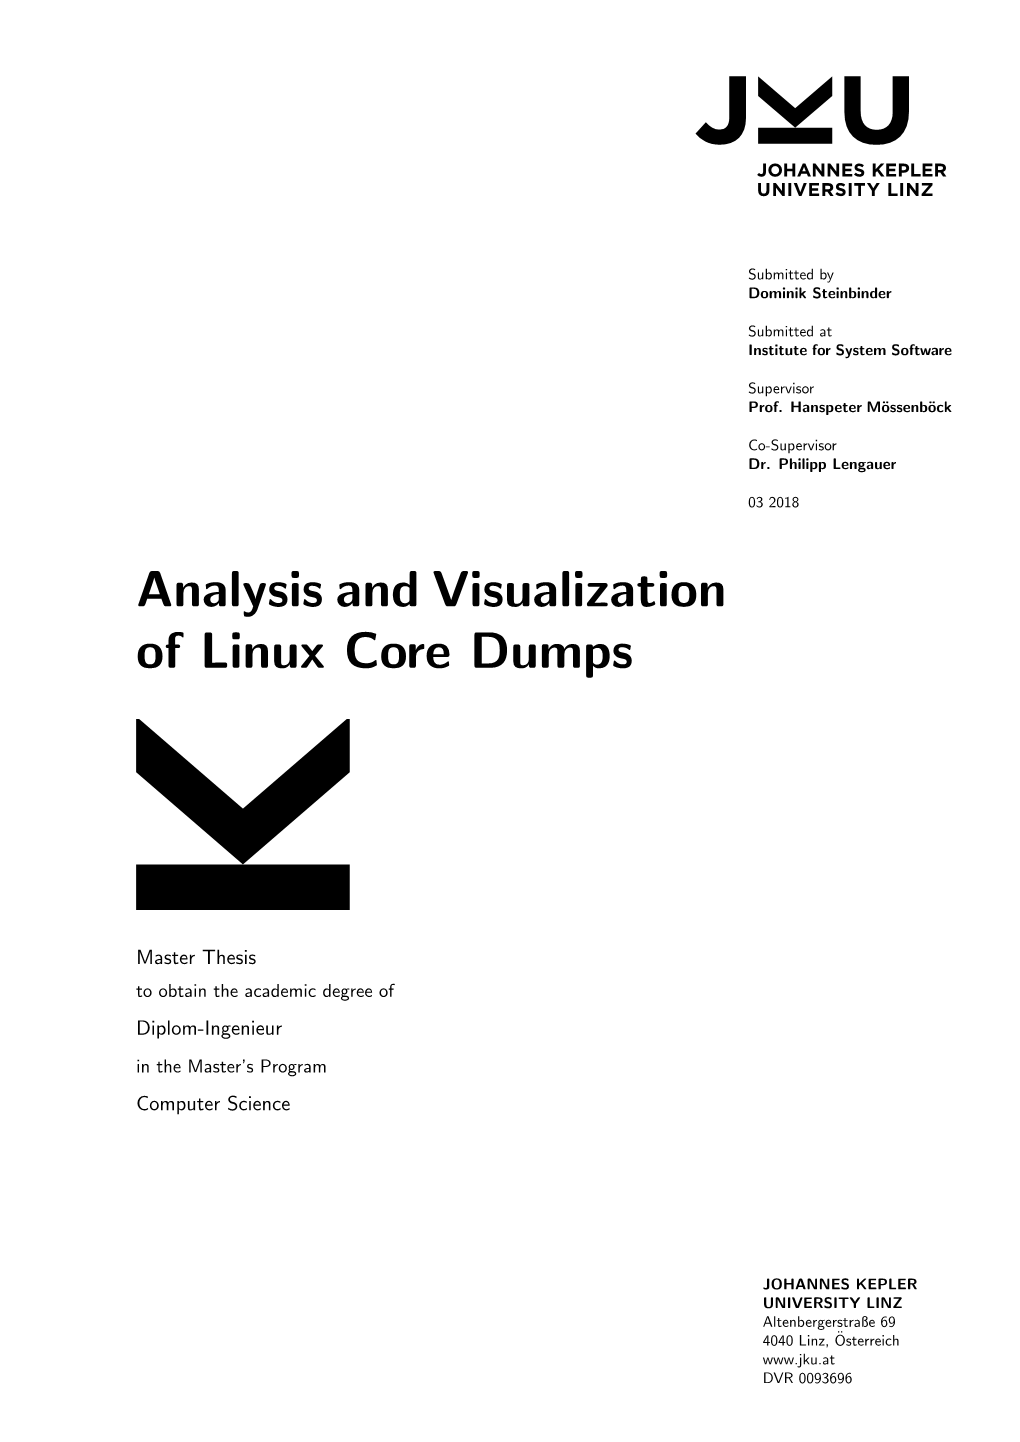 Analysis and Visualization of Linux Core Dumps